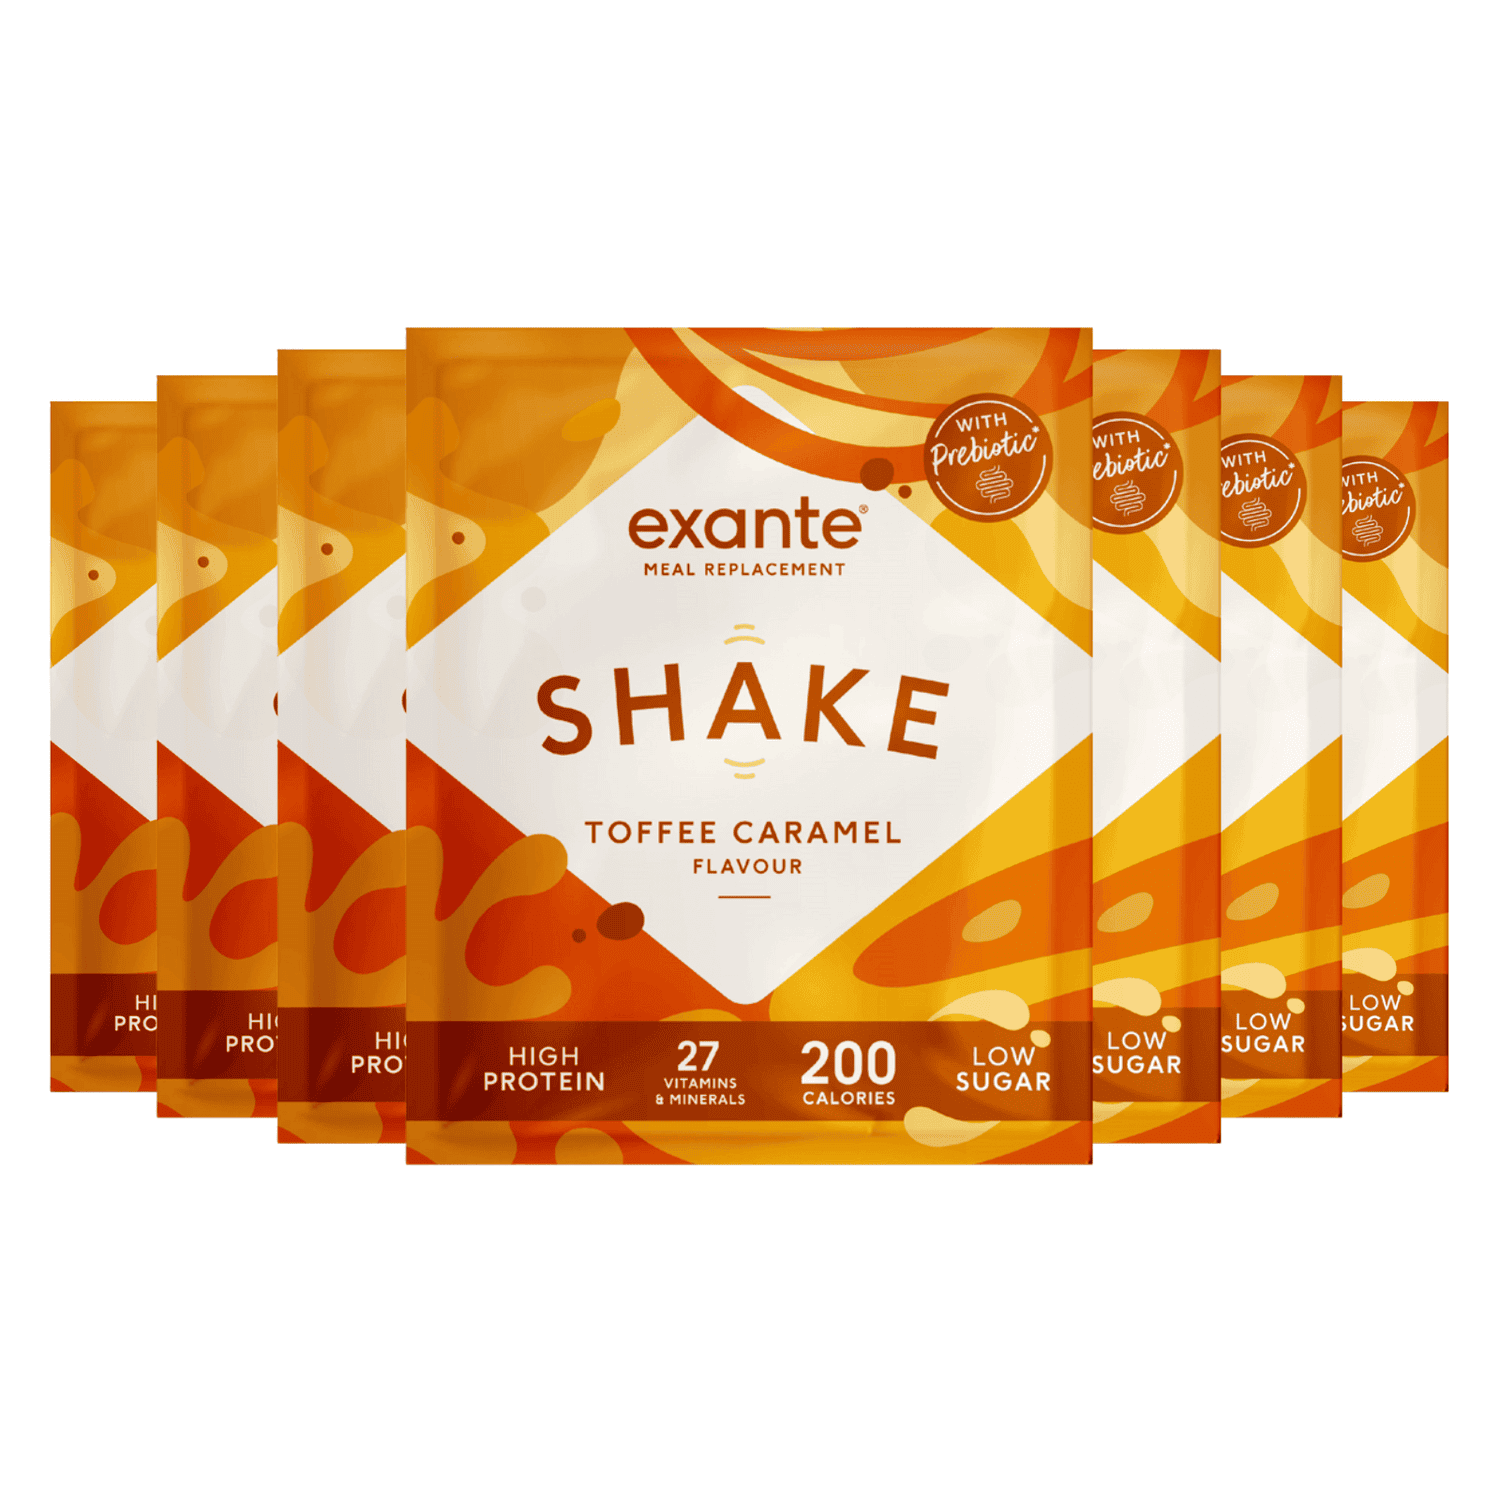 Exante Diet Meal Replacement Shake, Toffee Caramel, Box of 7